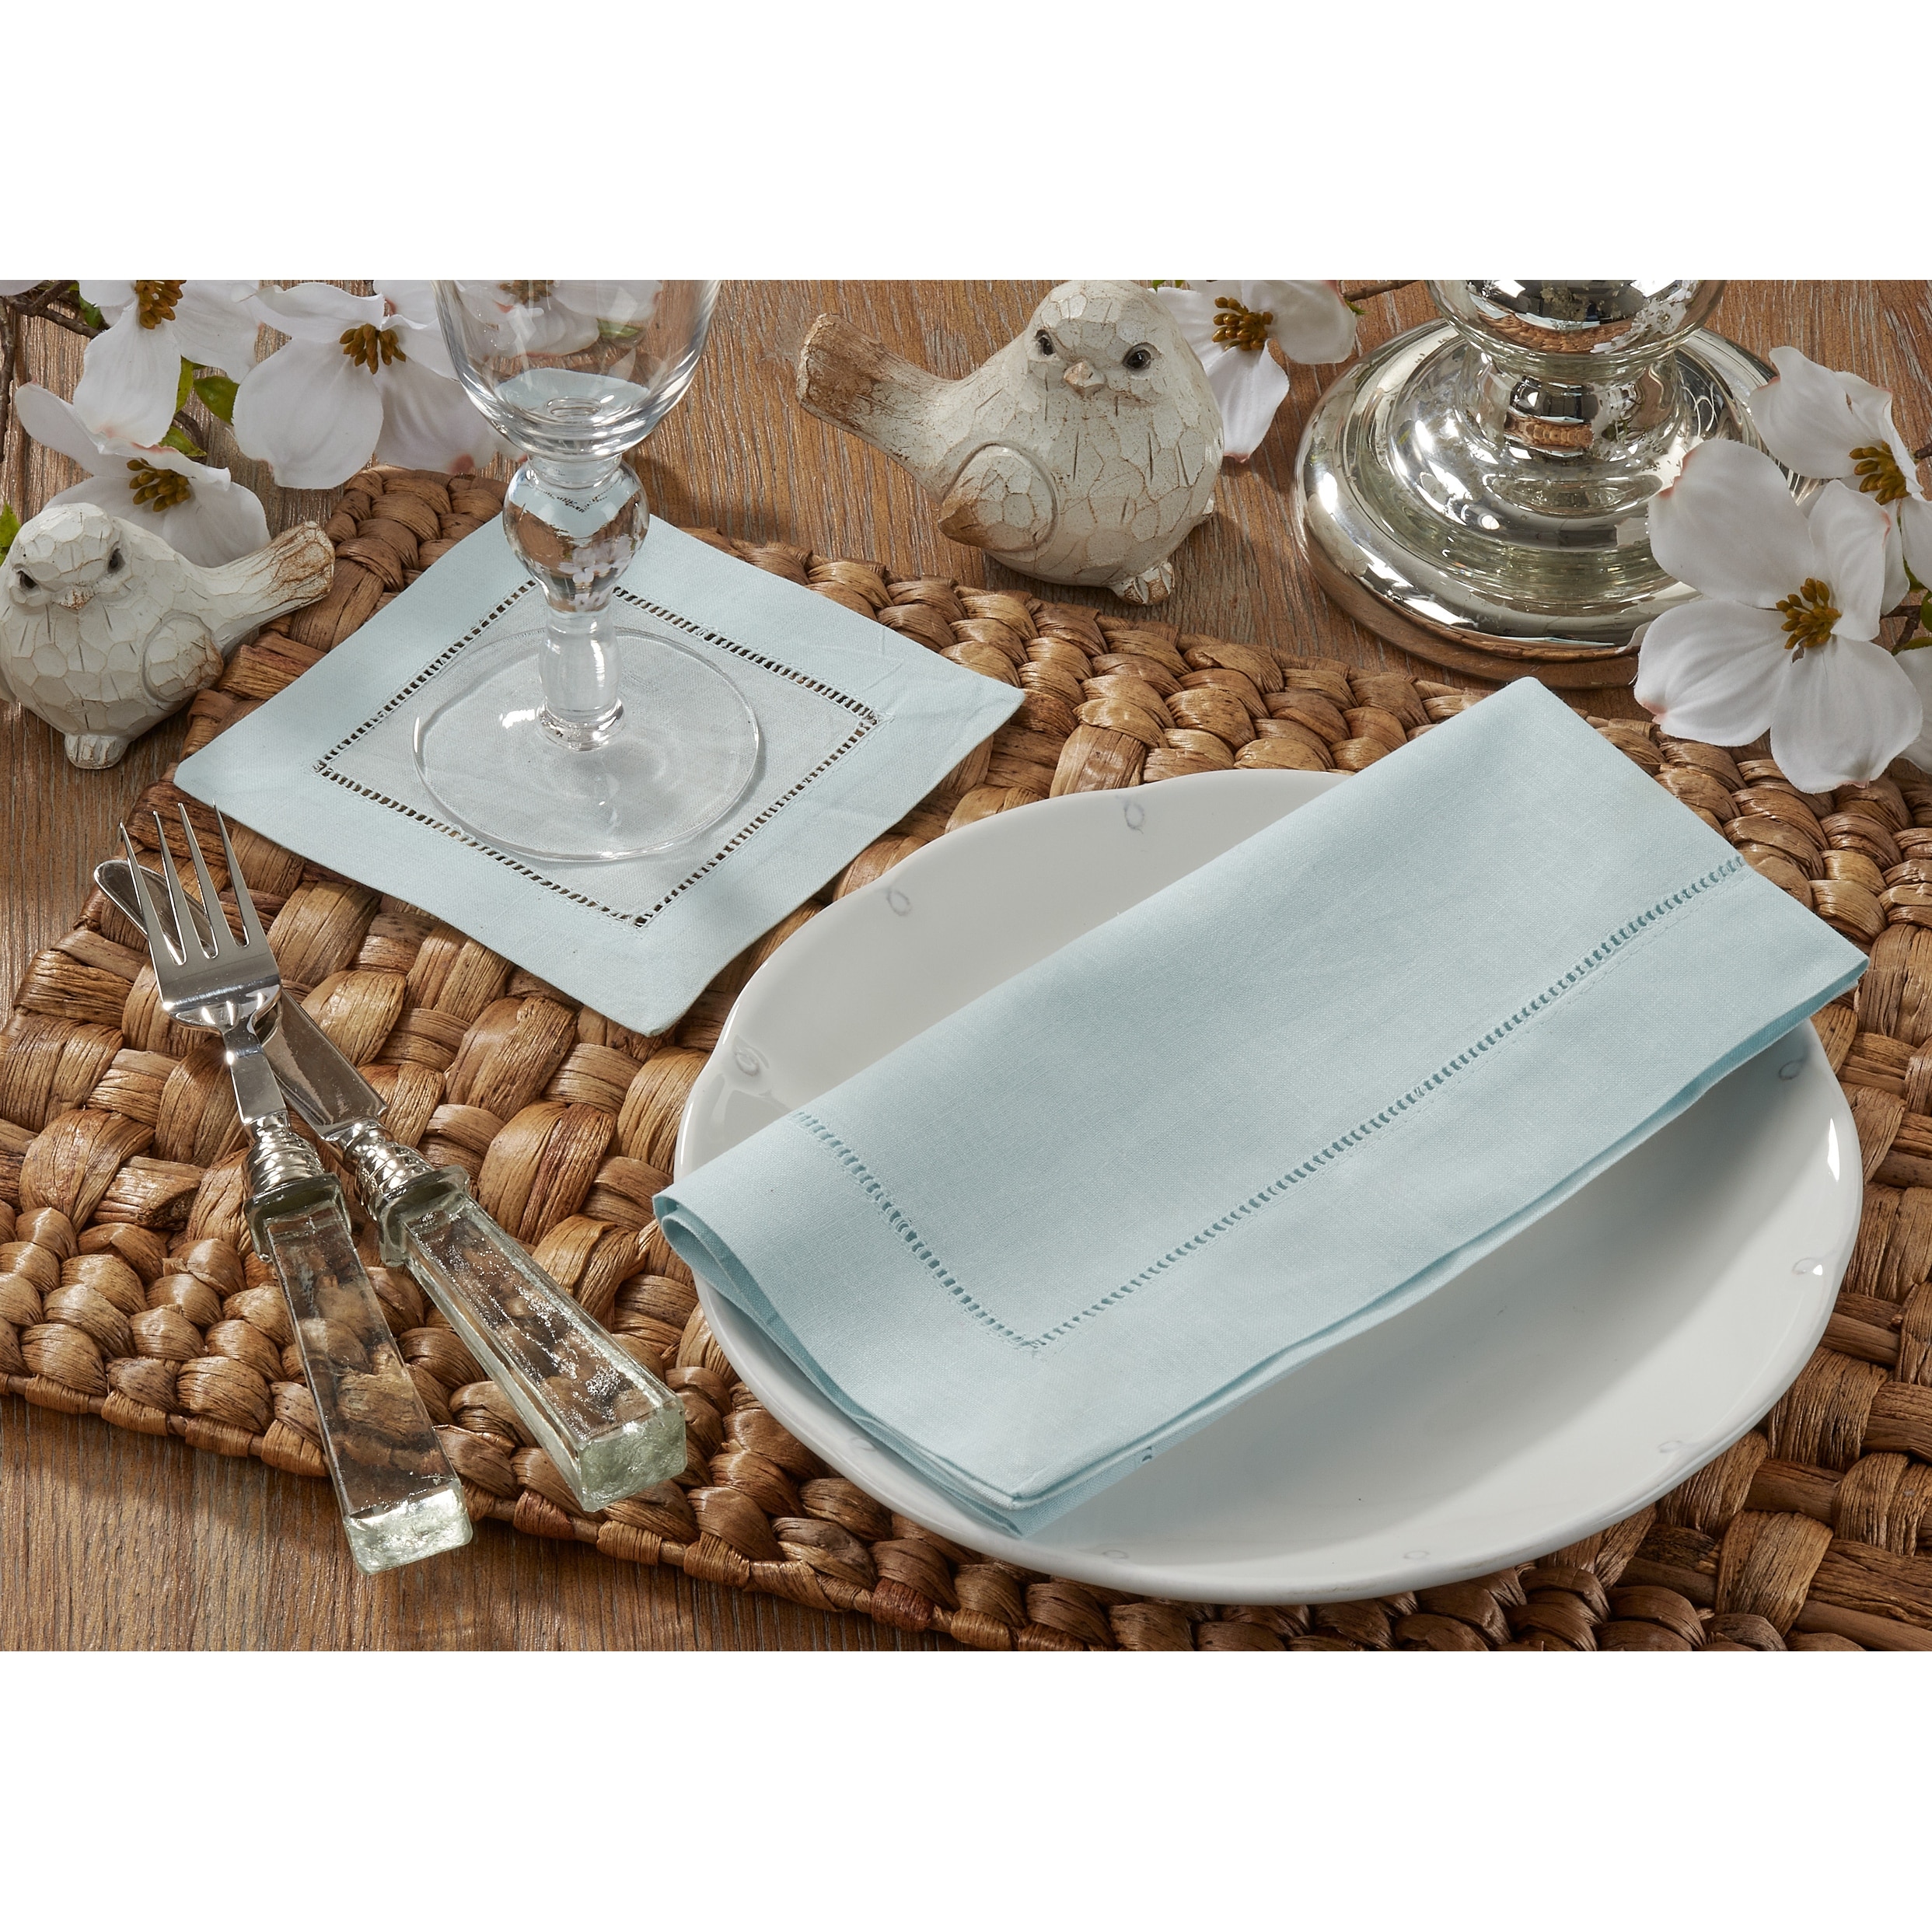 https://ak1.ostkcdn.com/images/products/is/images/direct/c9e0647161a87ca99f86d9add8f7a11c2c782e63/Hemstitched-Dinner-Napkins-%28Set-of-4%29.jpg